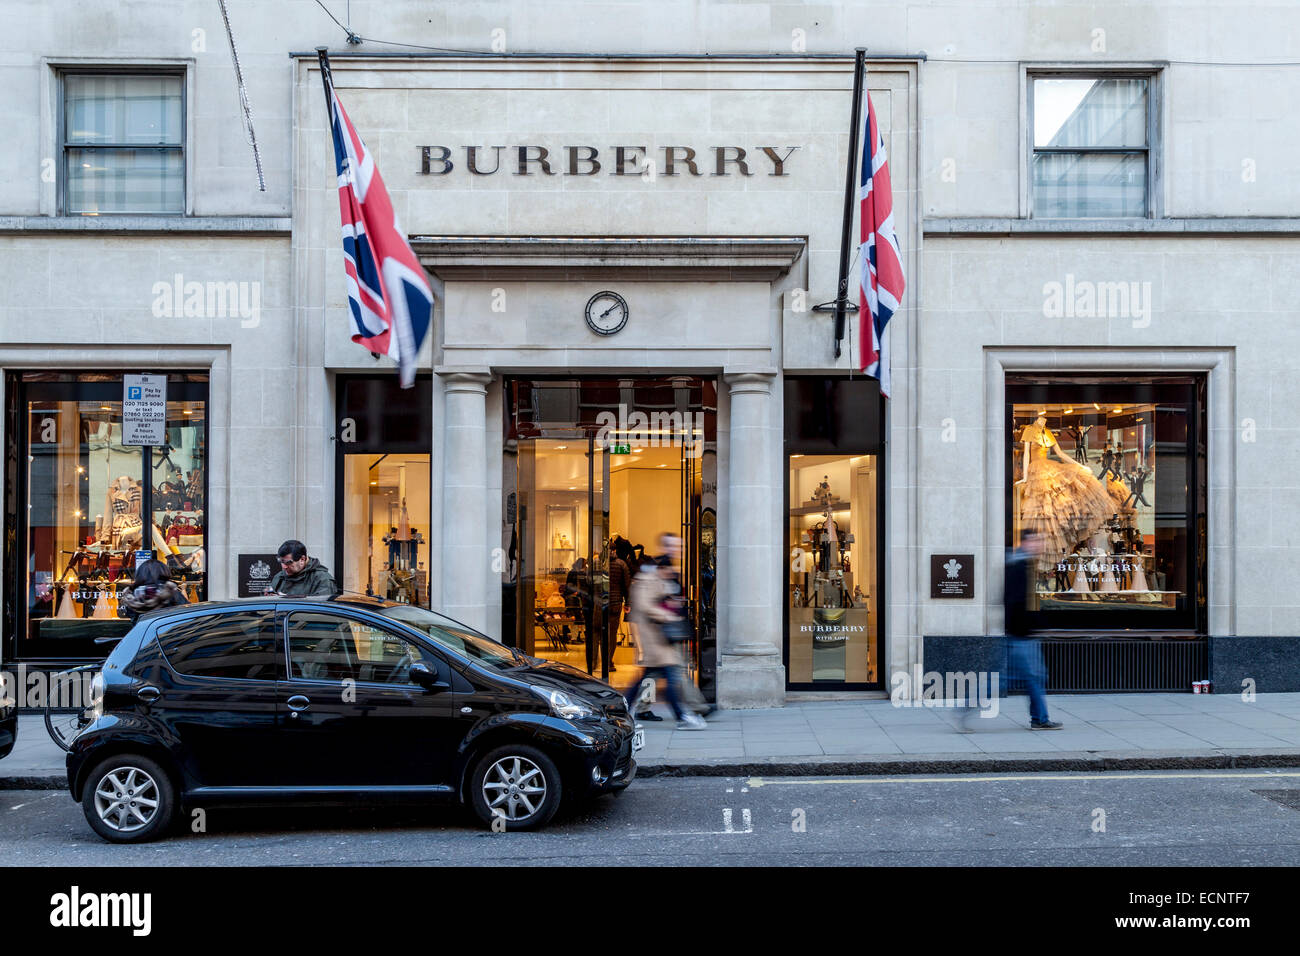 Æble Sinewi Periodisk The Burberry Store In New Bond Street, London, England Stock Photo - Alamy